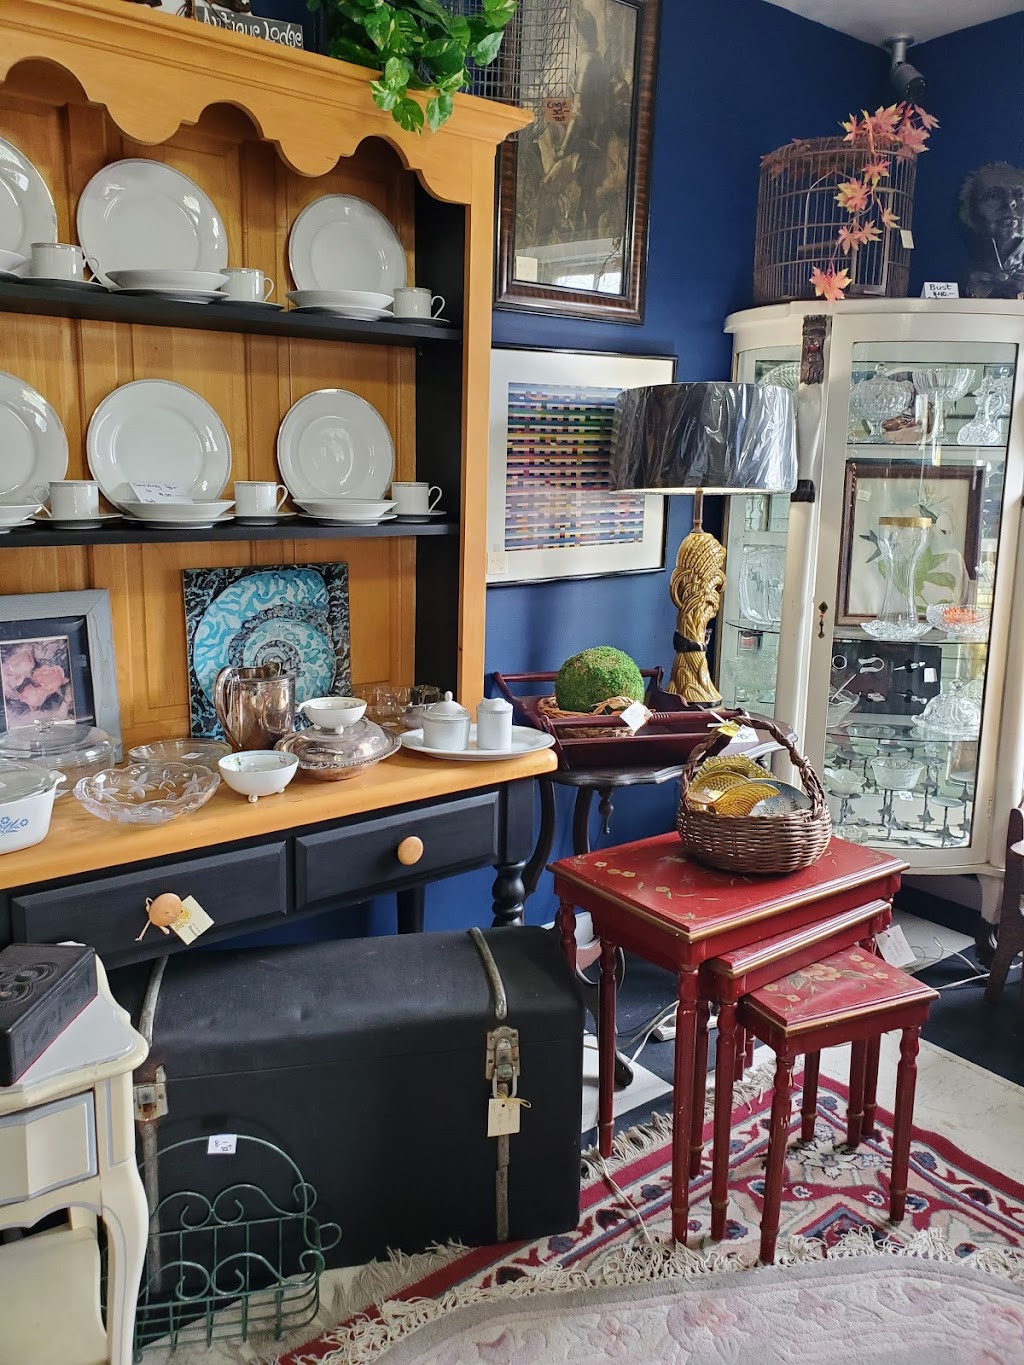 Great Andover Antique Village | 122 Main St, Andover, NJ 07821 | Phone: (973) 786-6384